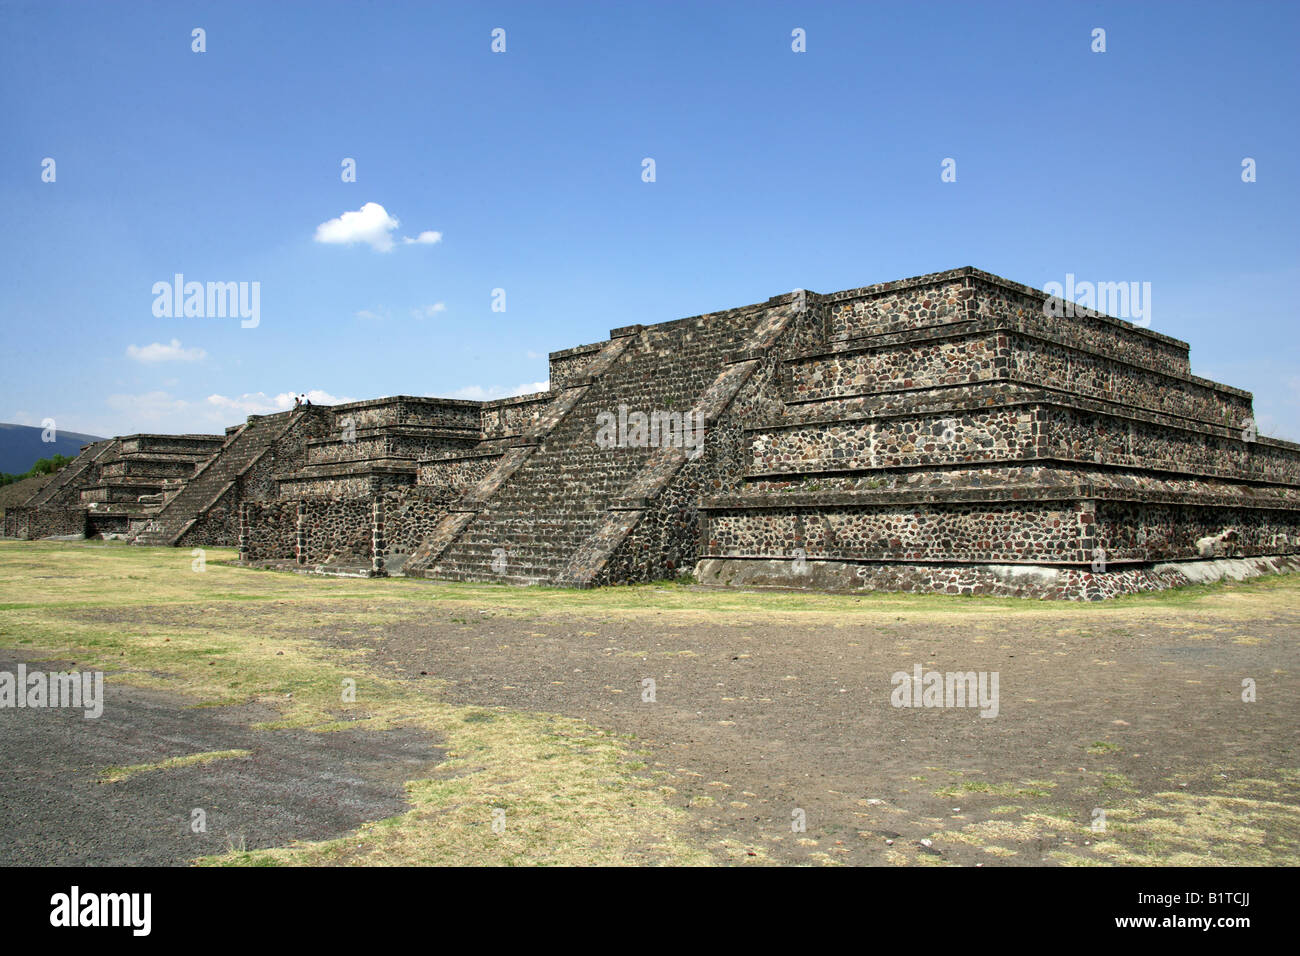 The Plaza of the Moon, Teotihuacan, Mexico Stock Photo